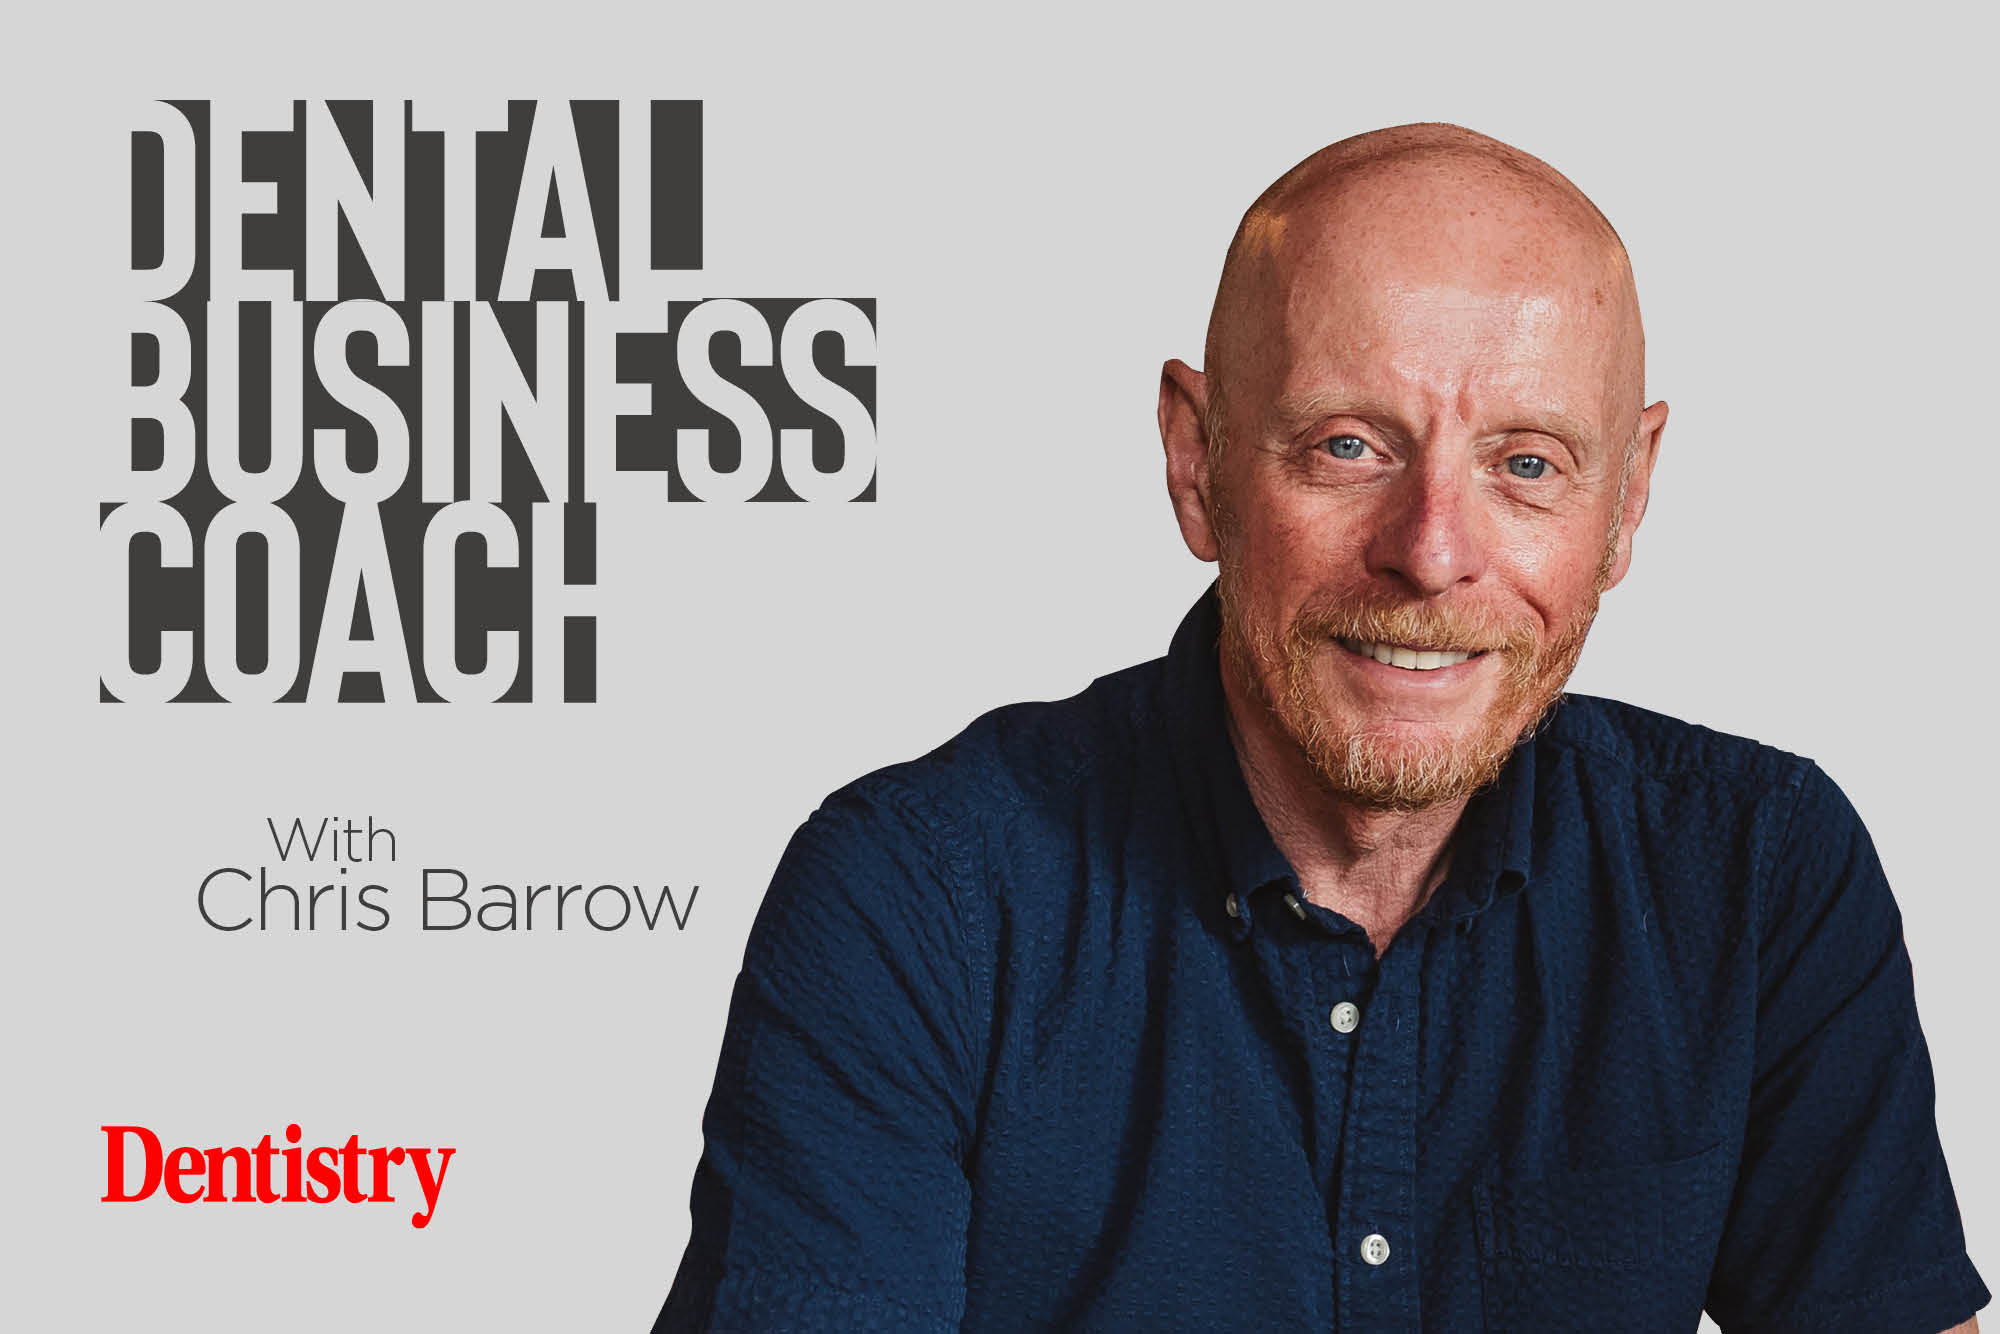 The Dental Business Coach, Chris Barrow, reflects on an inspirational book, which highlights the successful impact of routine, hard work and plodding along.